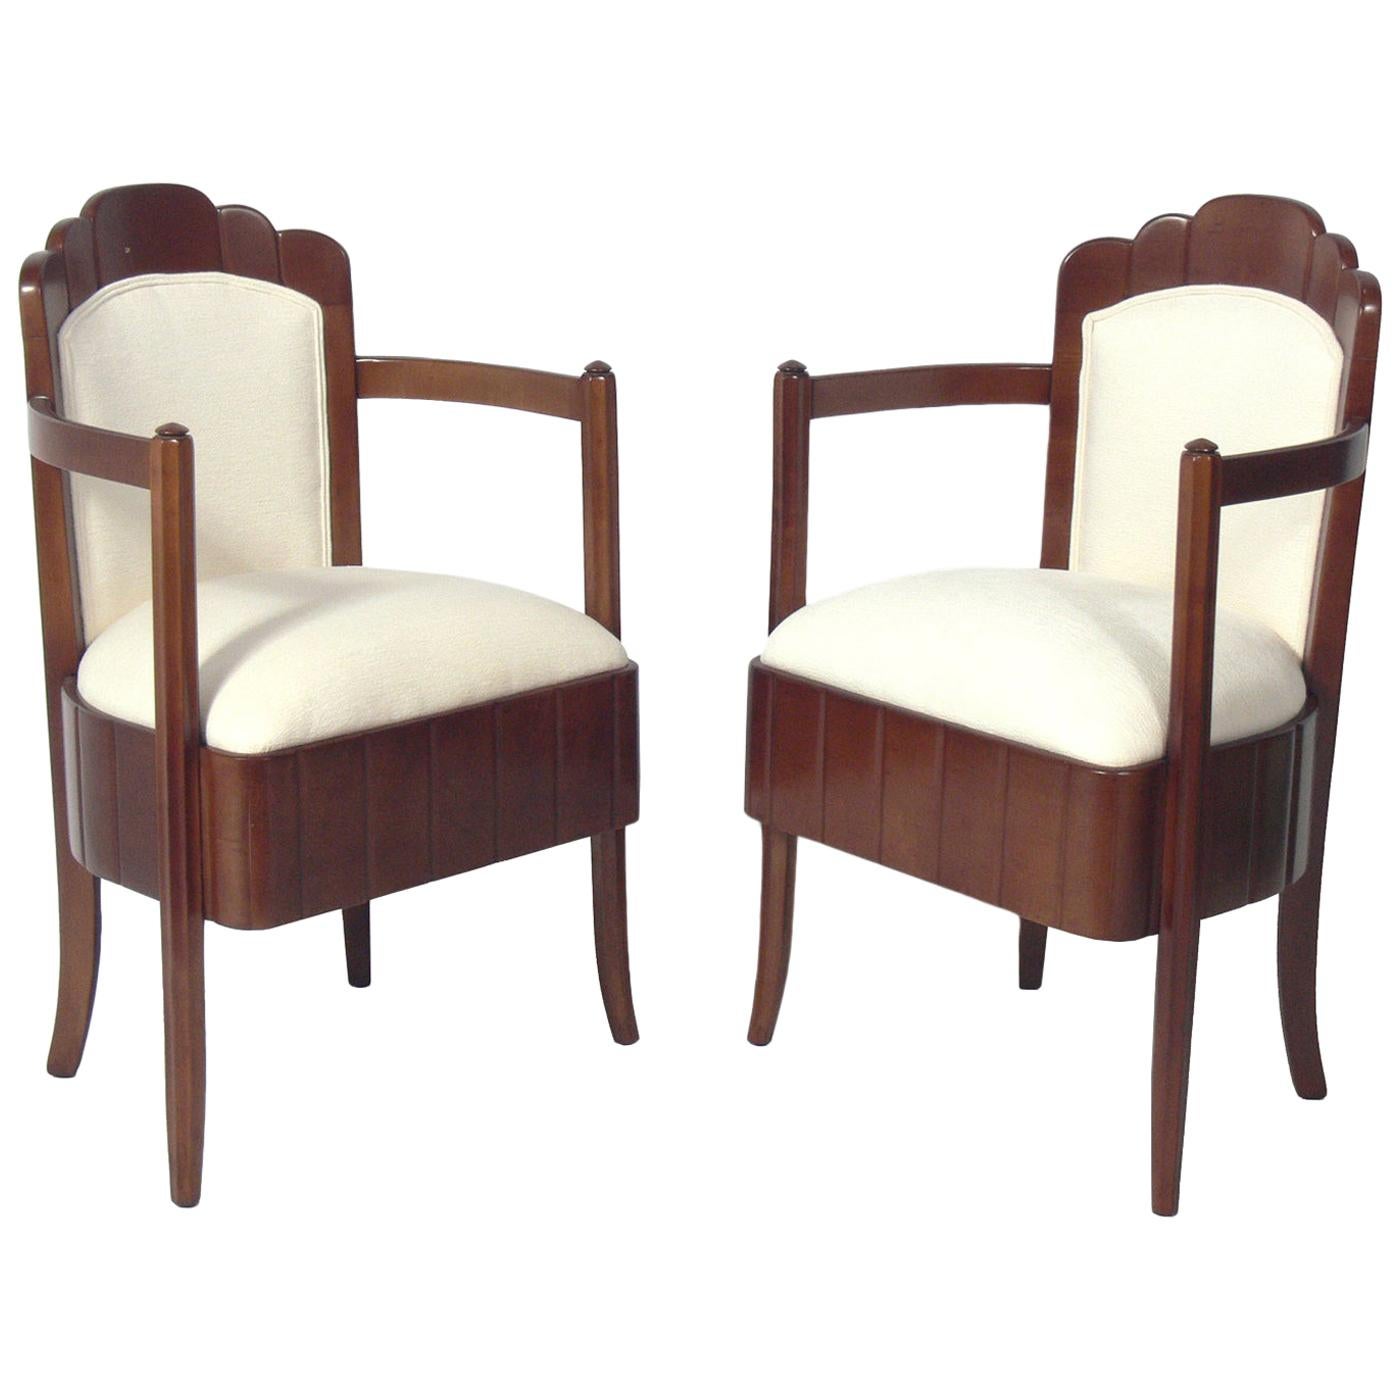 Pair of French Art Deco Armchairs by Pierre Patout for the Ile de France